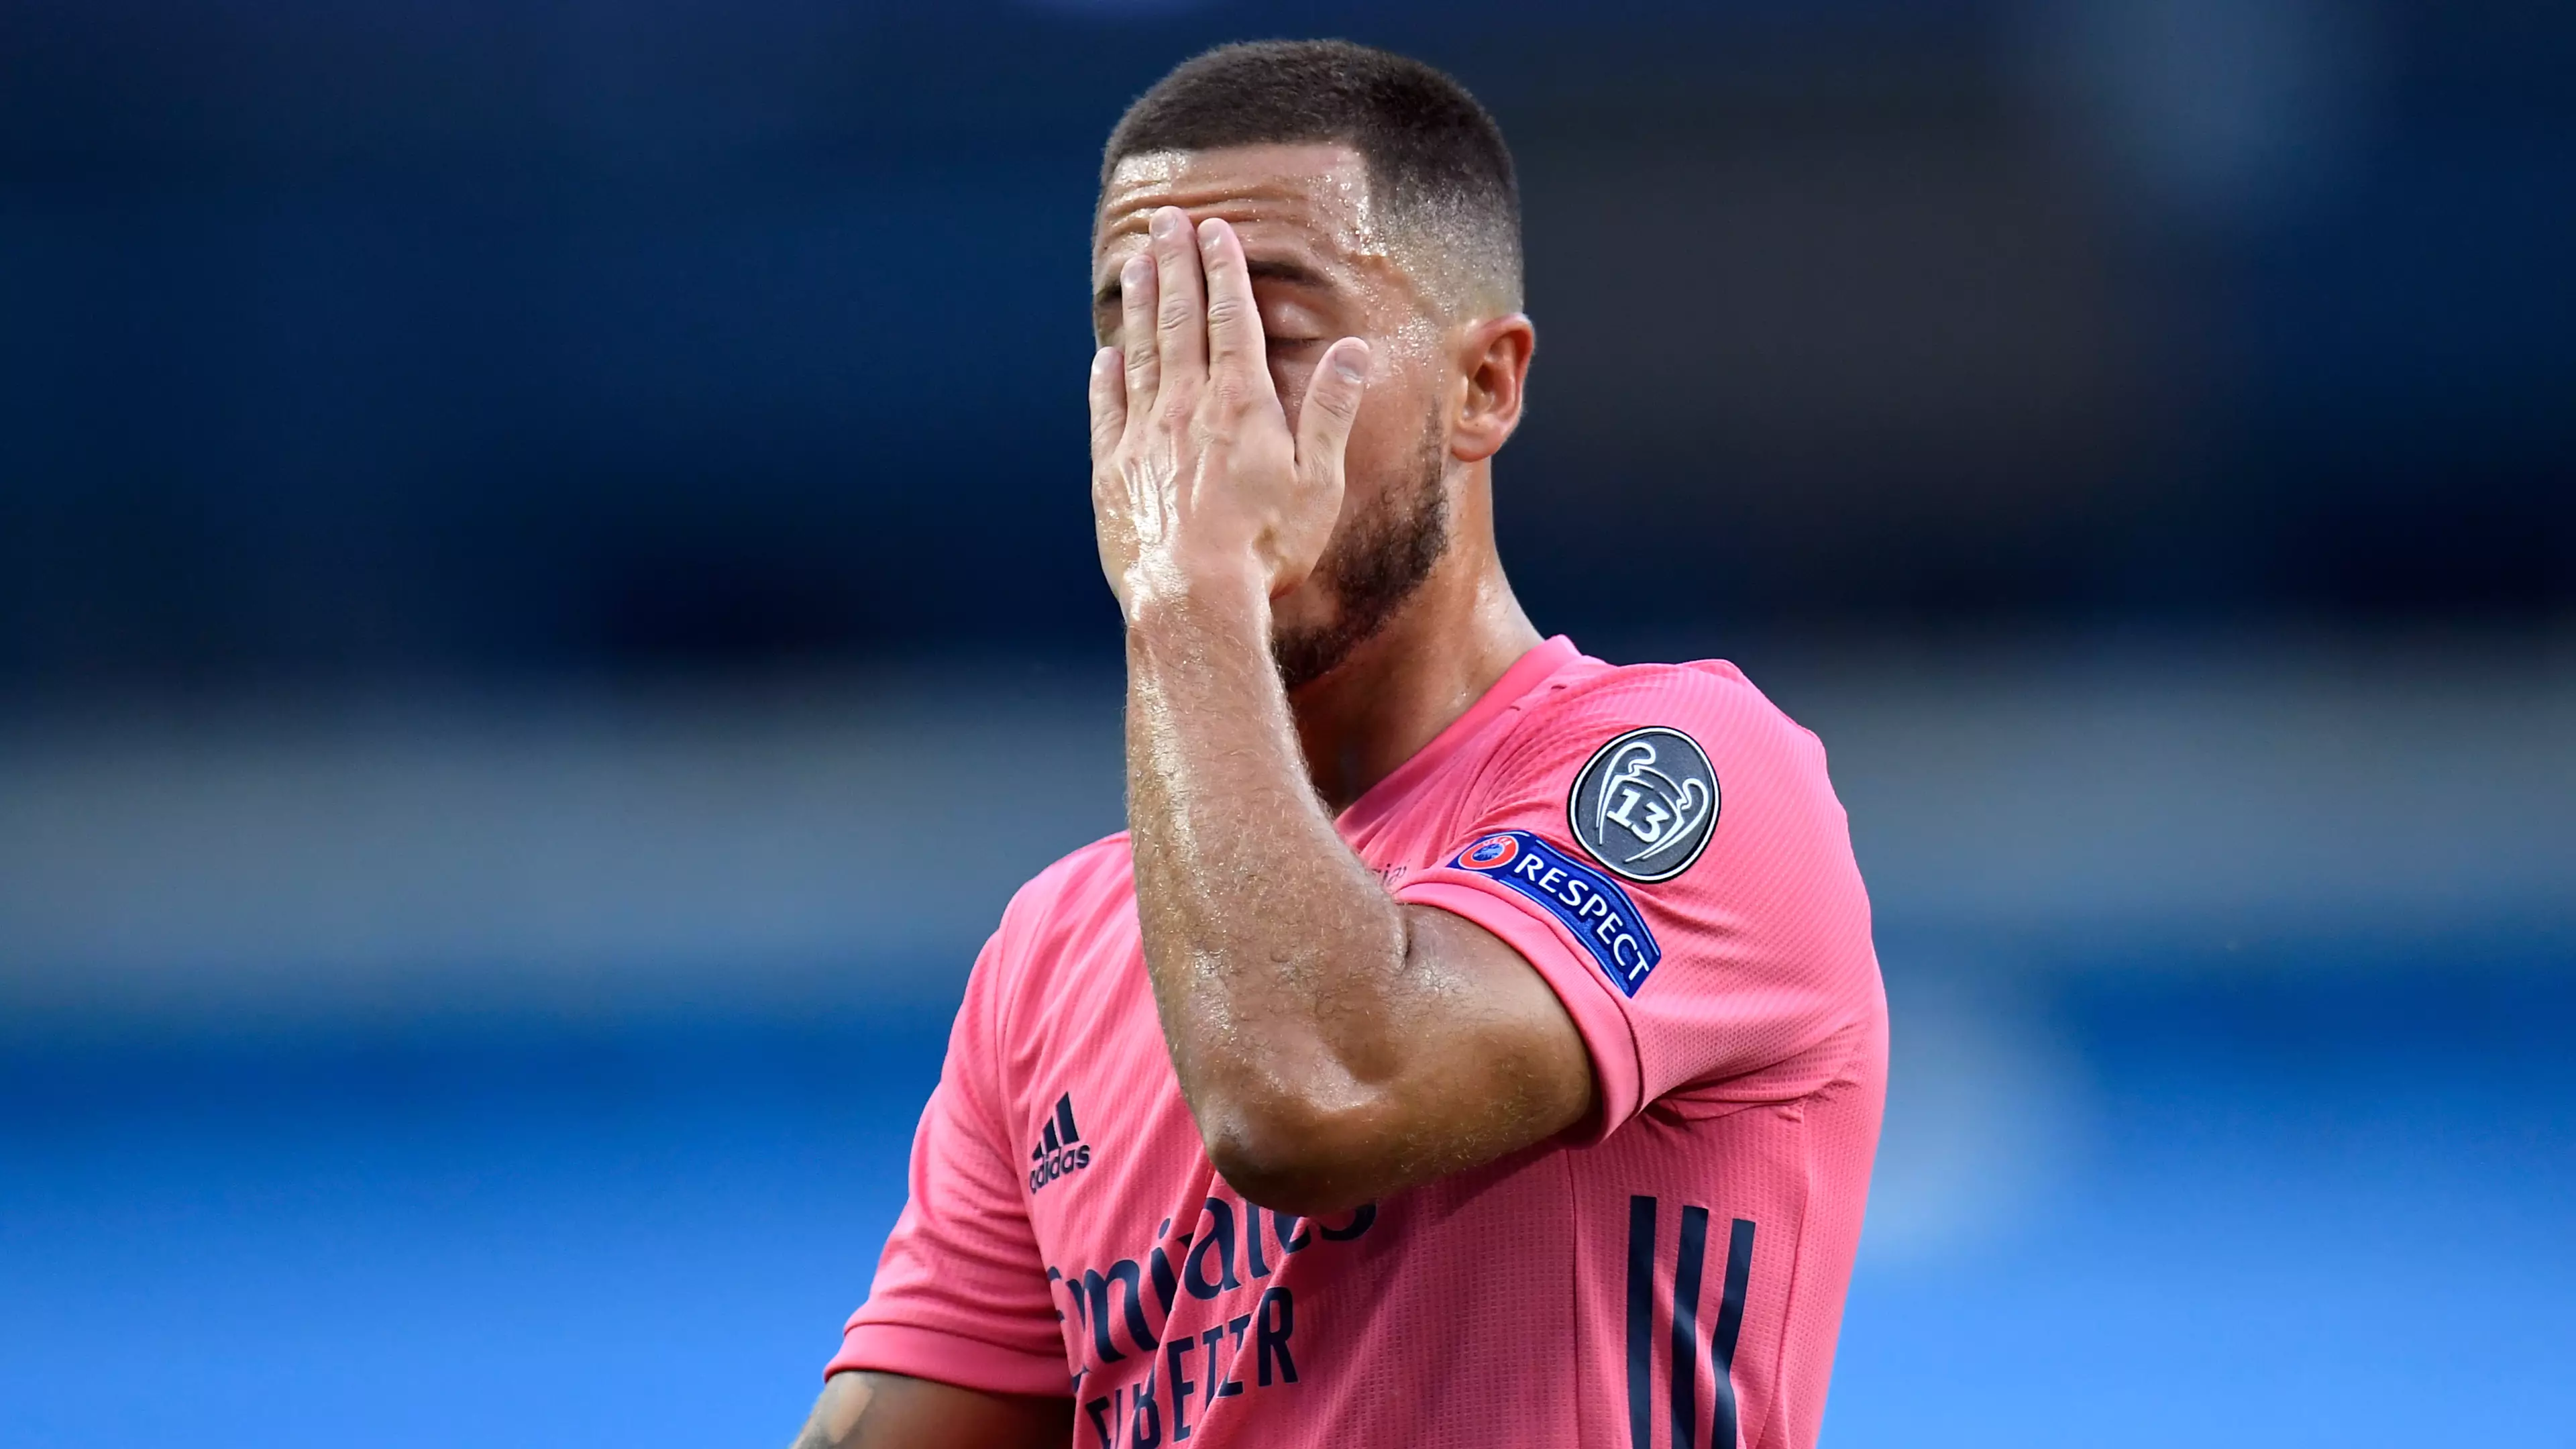 Eden Hazard Branded 'A Joke' And Accused Of A 'Lack Of Commitment' At Real Madrid